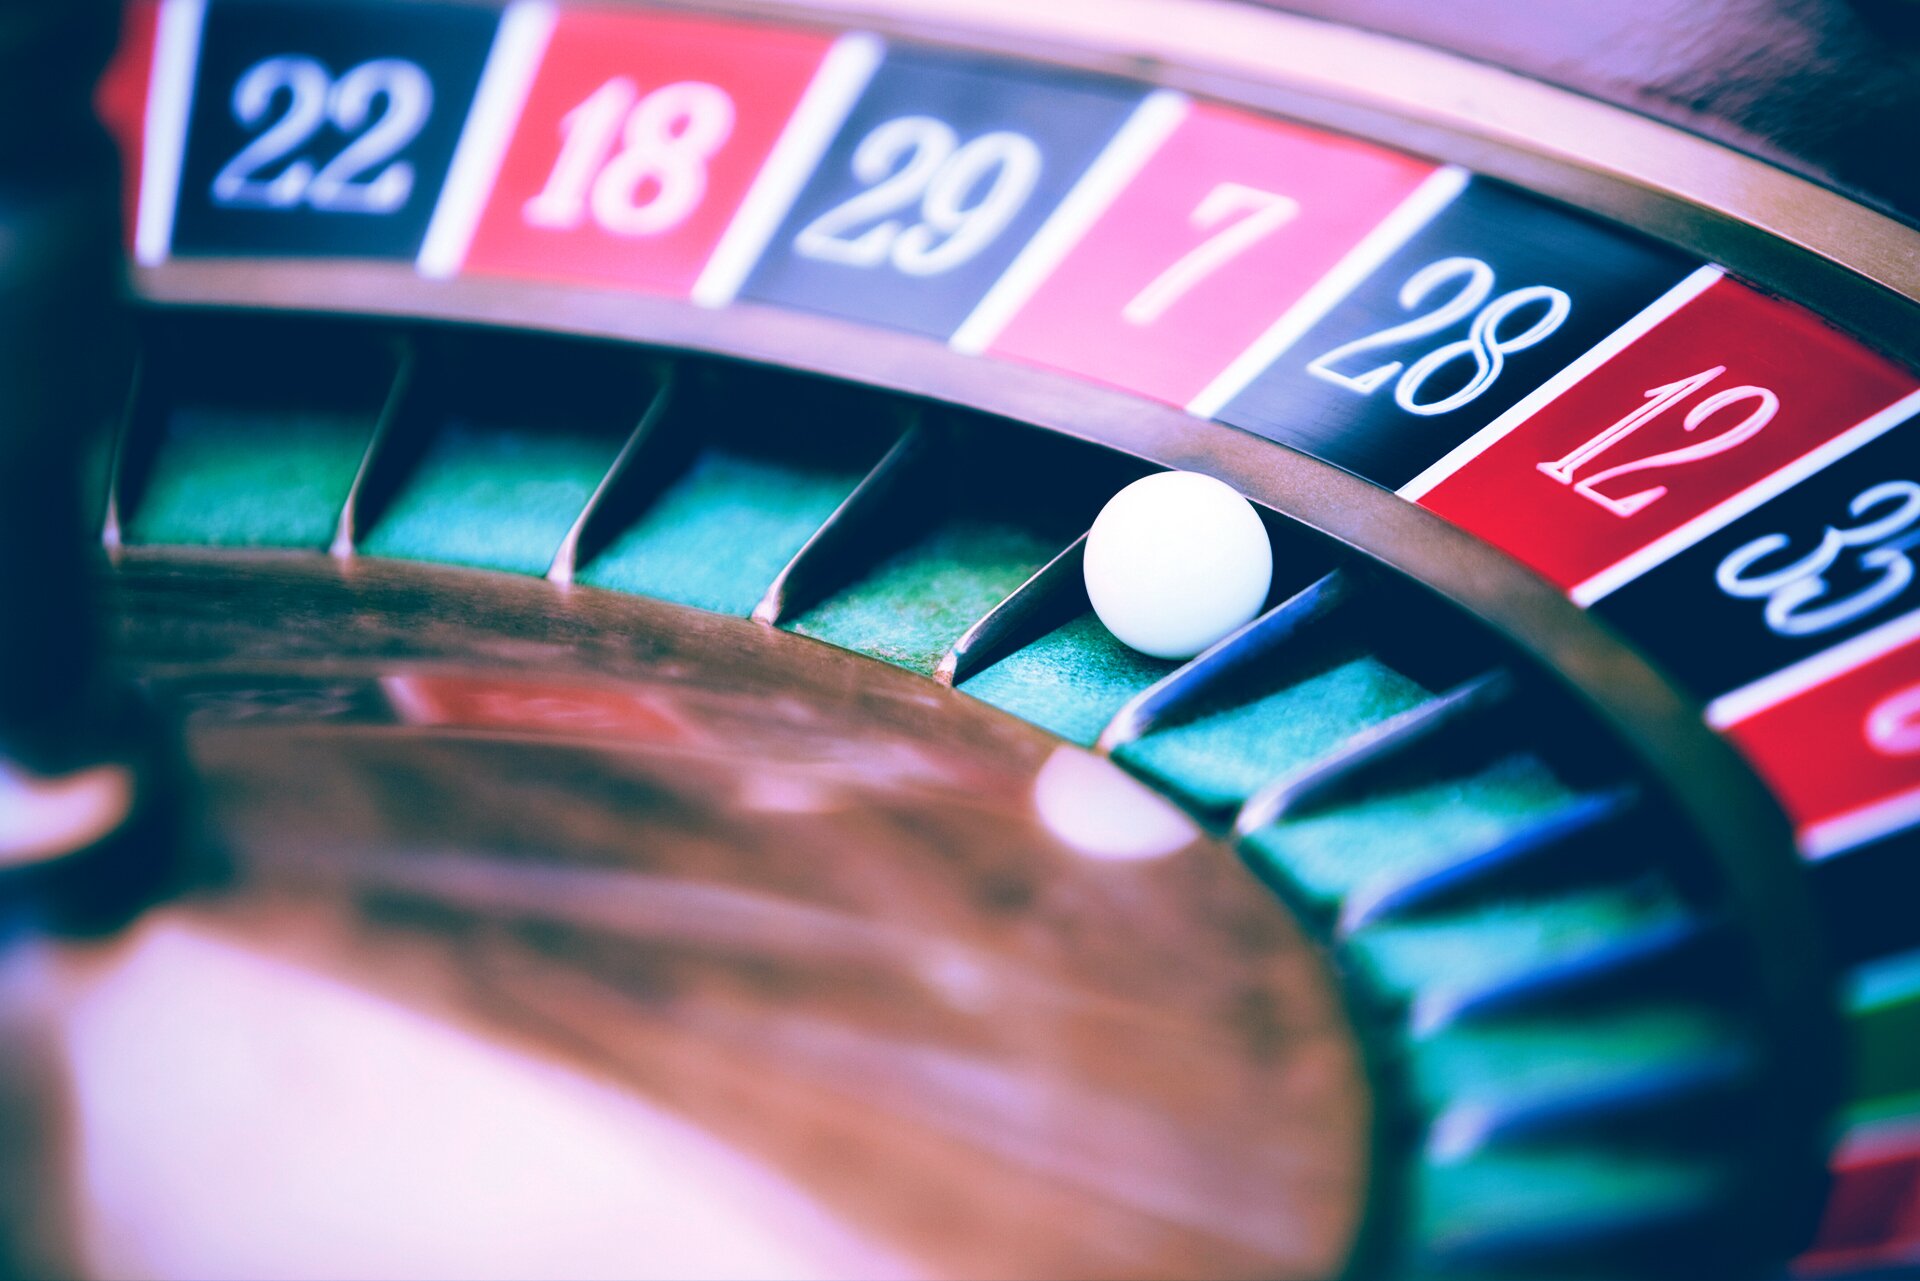 casino games play free online american roulette